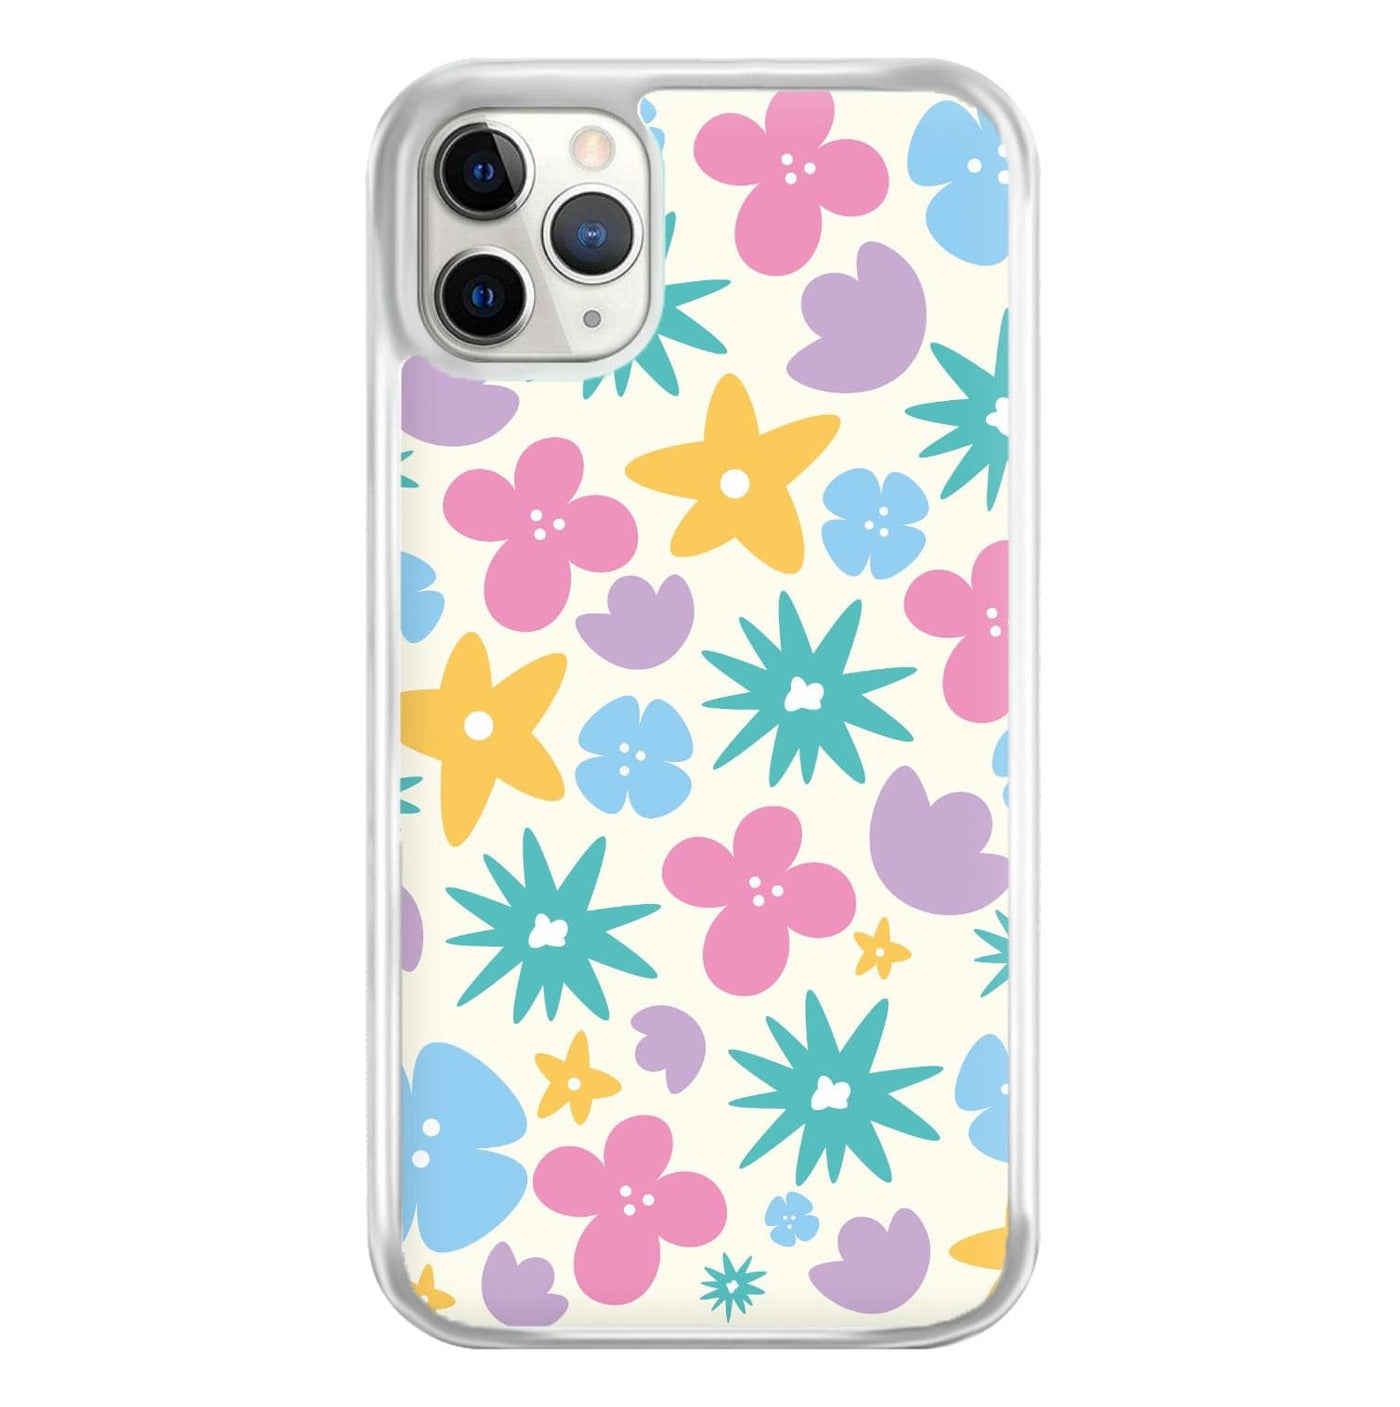 Playful Flowers - Floral Patterns Phone Case